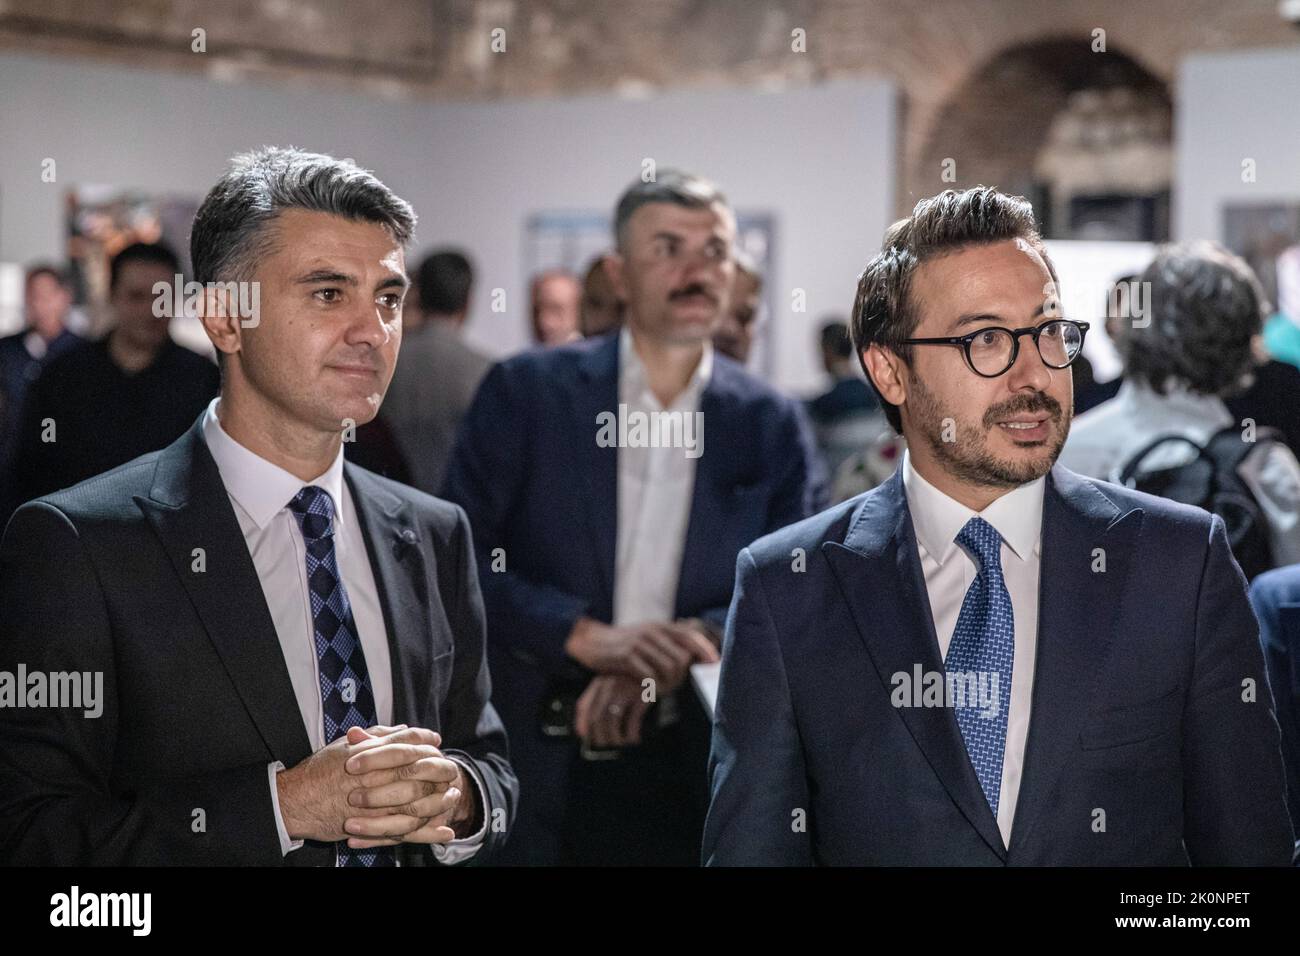 Istanbul, Turkey, 12/09/2022, Anadolu Agency General Manager Serdar Karagoz (right) and Anadolu Agency Visual News Editor Firat Yurdakul (left) seen looking at the photographs exhibited at the Istanbul Photo Awards 2022. Istanbul Photo Awards 2022 Exhibition At Mimar Sinan Fine Arts University Tophane-i Amire Culture and Art Center, at the Single Dome building, with the participation of Anadolu Agency General Manager Serdar Karagoz, after the opening speech, Mimar Sinan Fine Arts University Rector Prof. Dr. Handan ?nci Elci opened with the presence of Beyoglu Mayor Haydar Ali Yildiz and guests Stock Photo